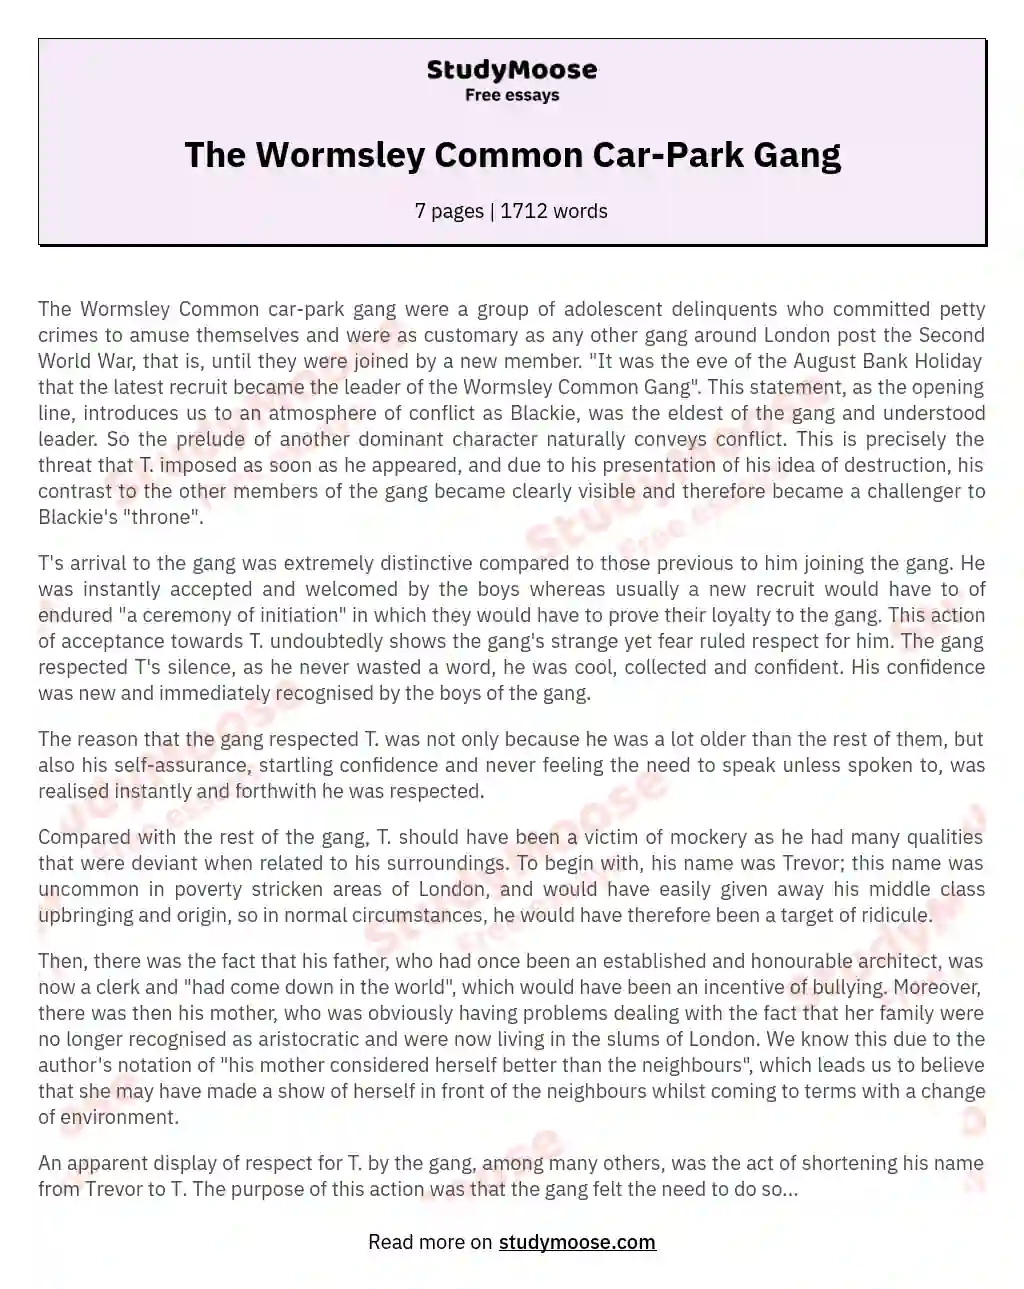 The Wormsley Common Car-Park Gang essay